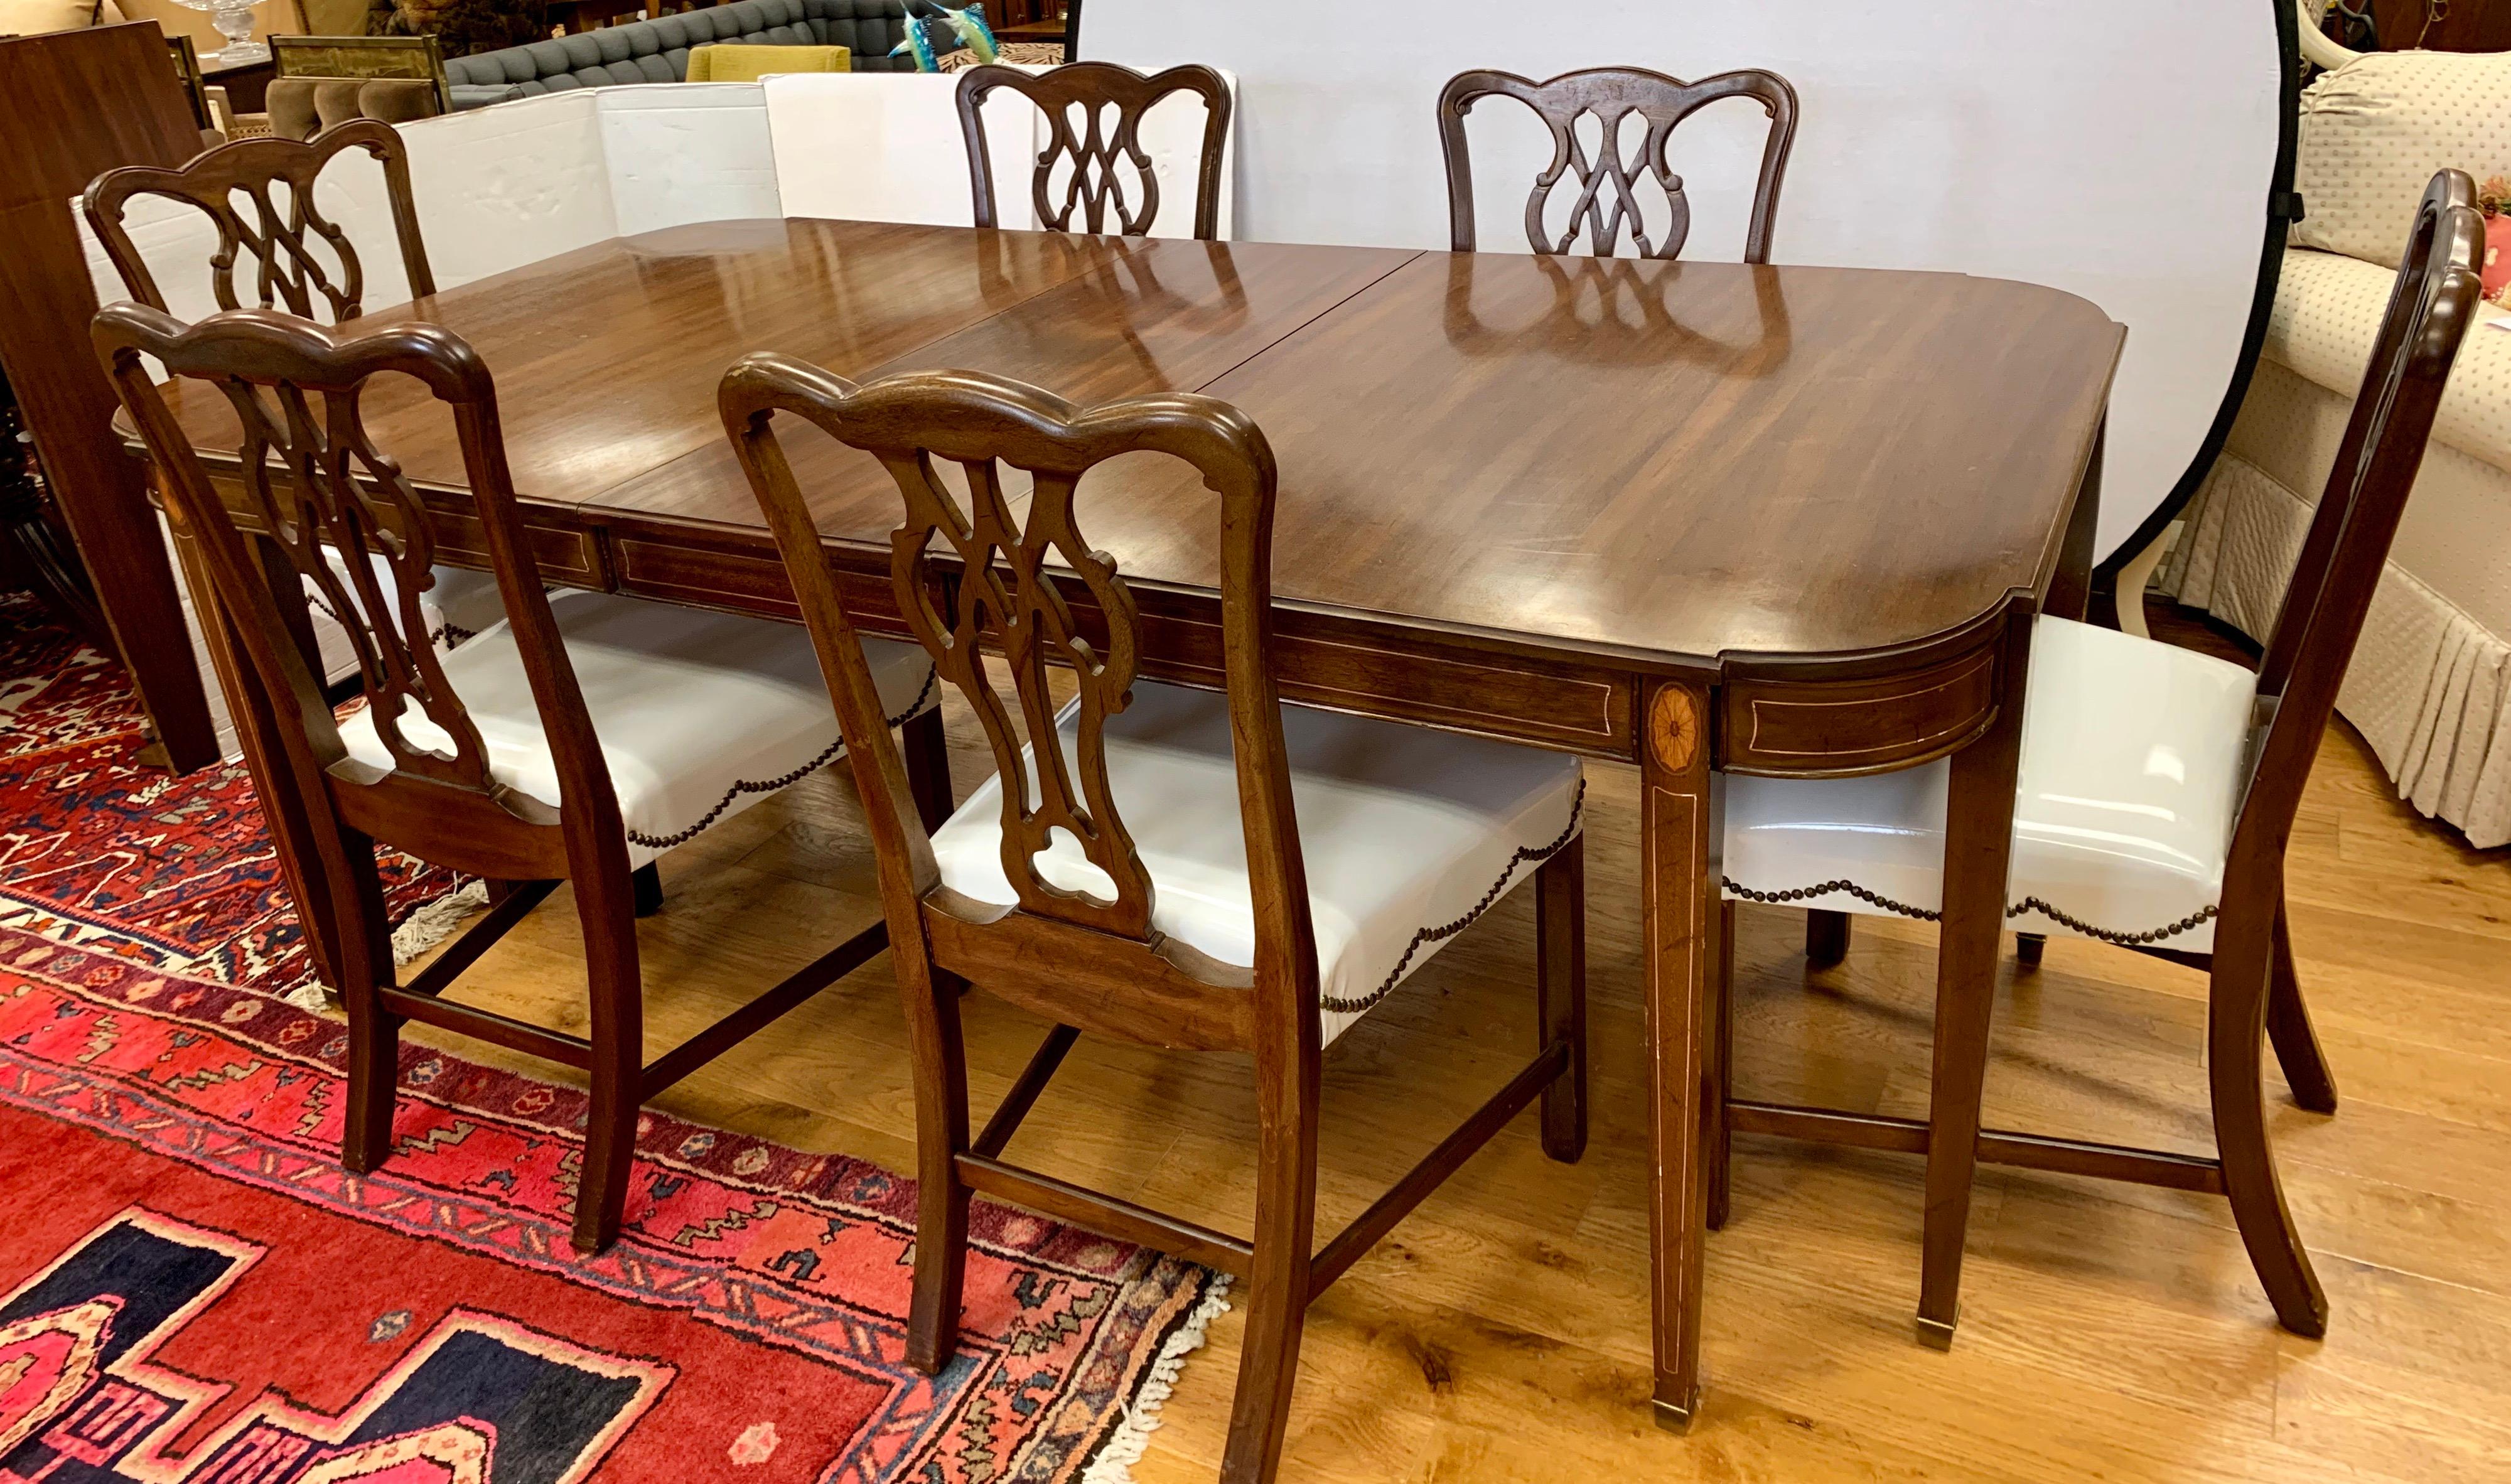 Classic Chippendale style dining set includes a mahogany extension table with oval and line inlay. It rests on eight square tapered legs with brass caps and has rounded corners. The two leaves measure 16” wide. Table is shown with one leaf